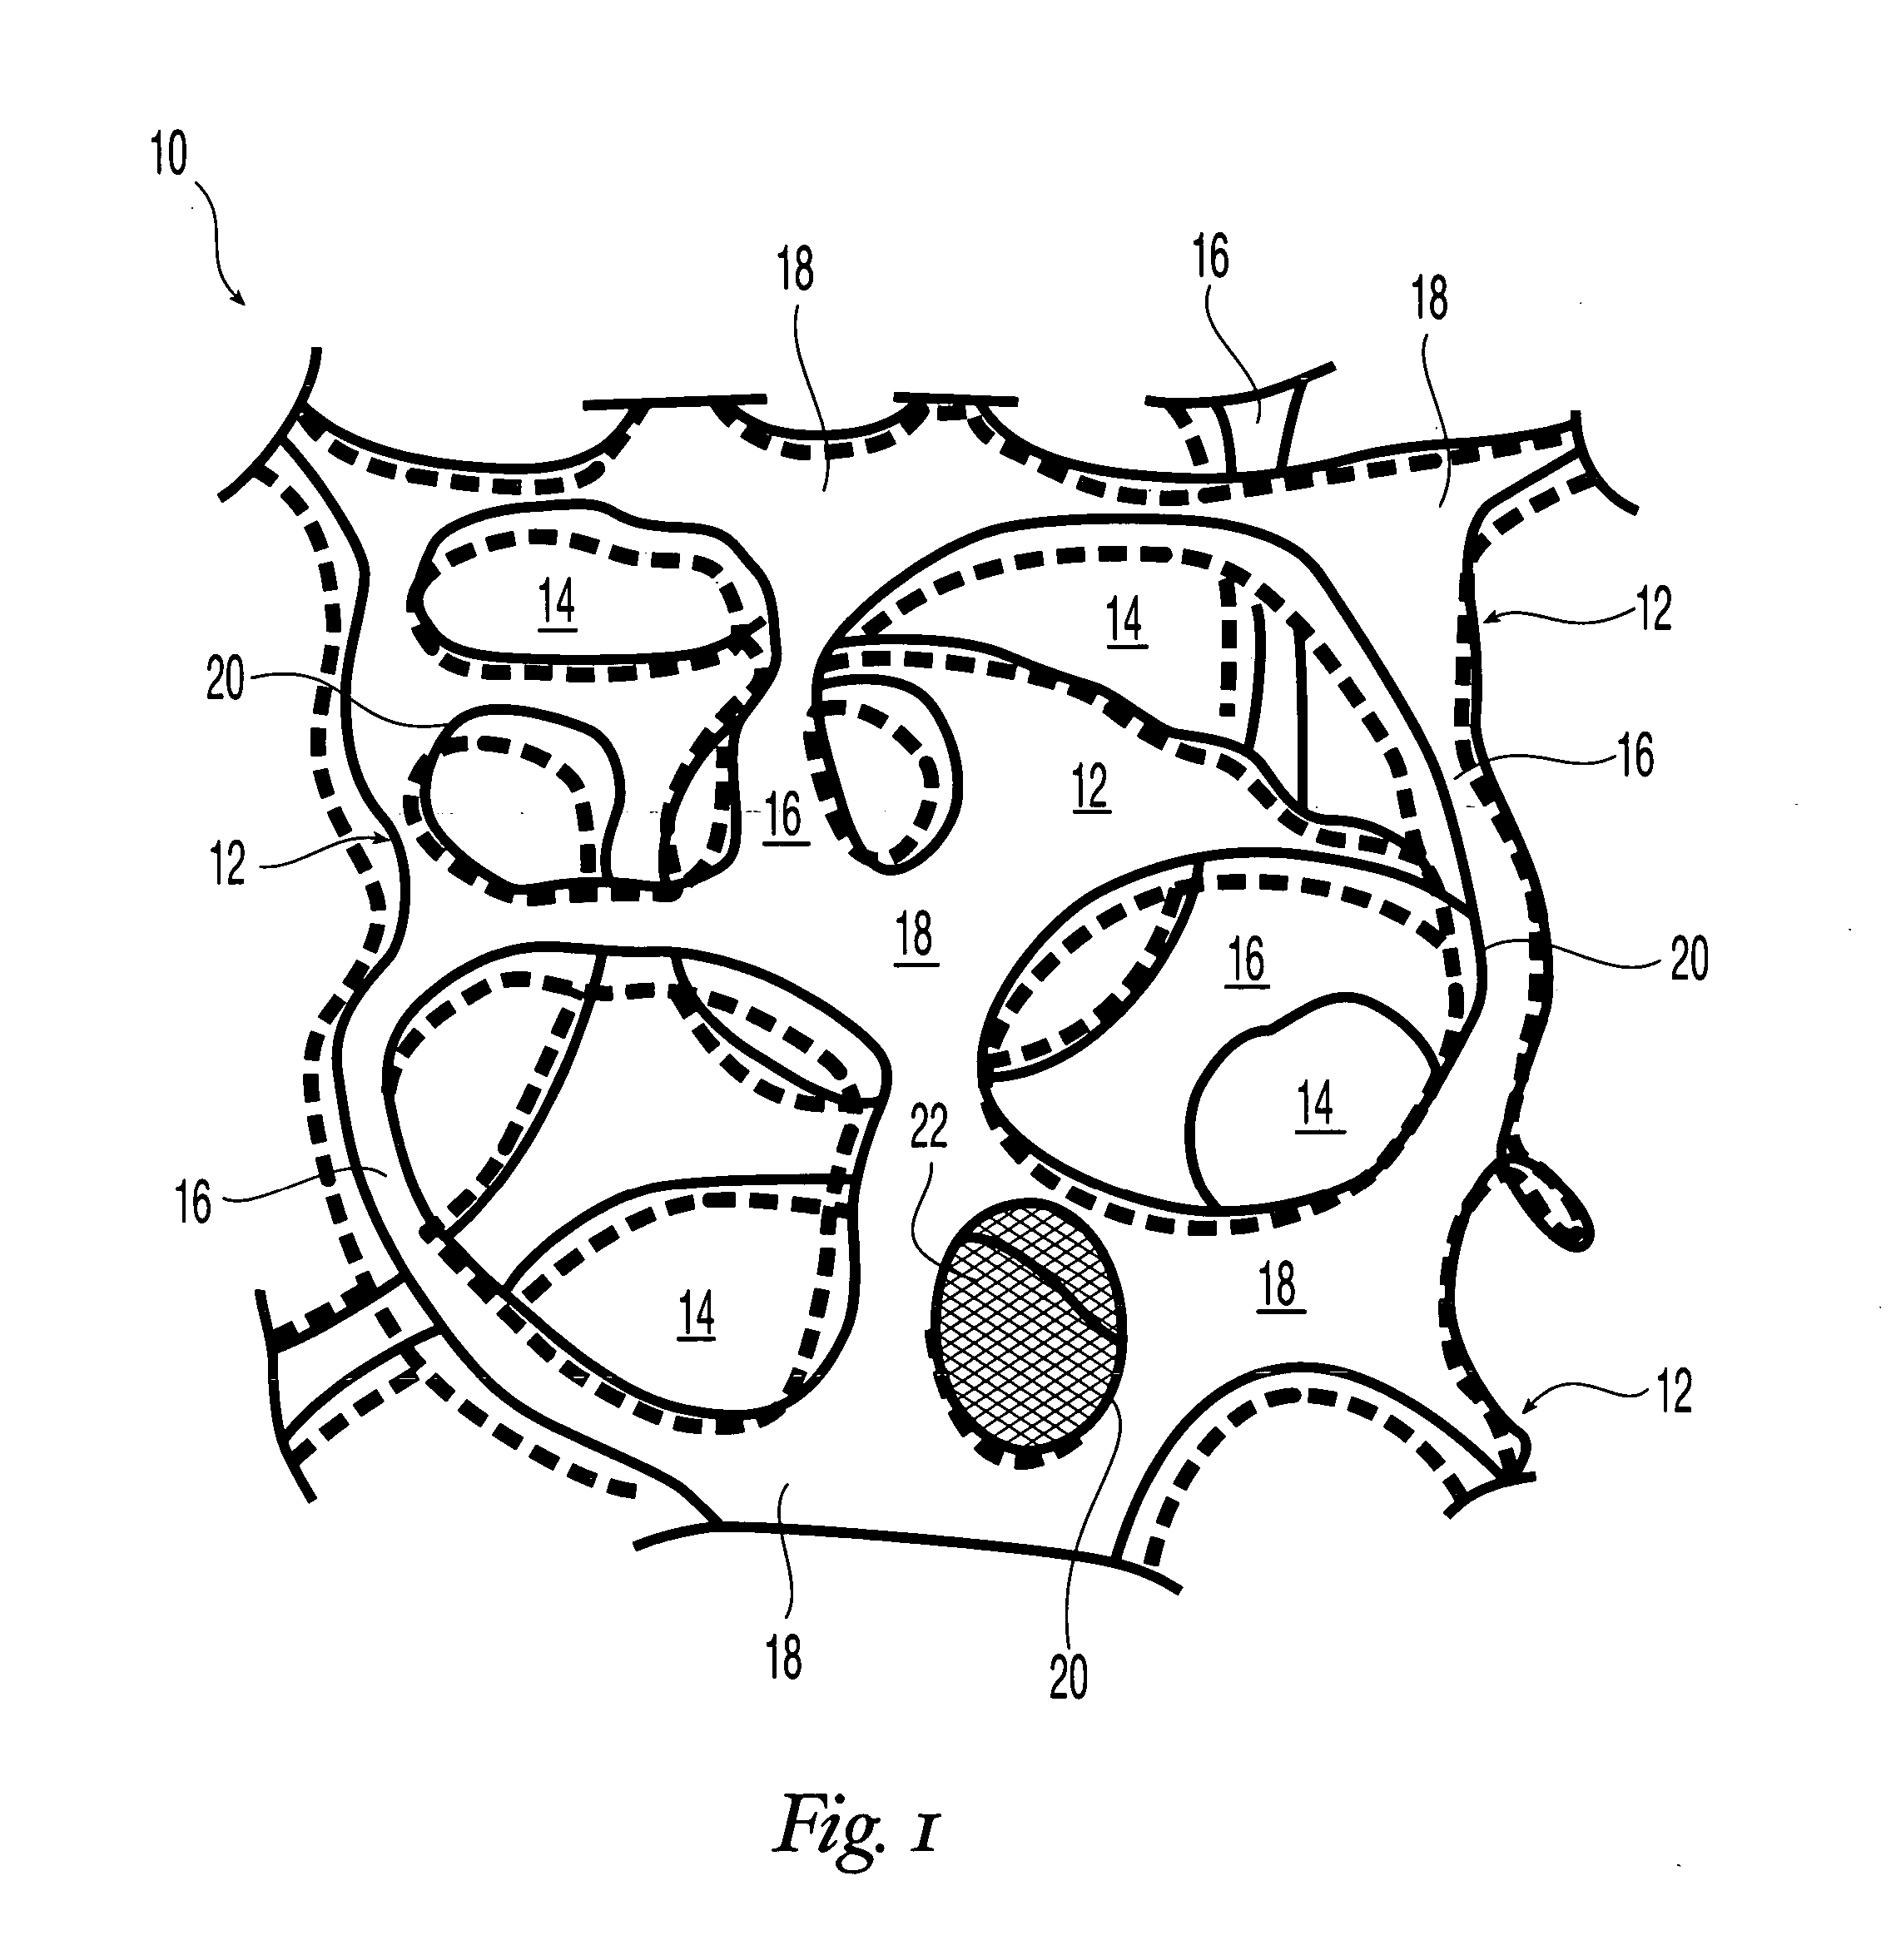 Reticulated elastomeric matrices, their manufacture and use in implantable devices